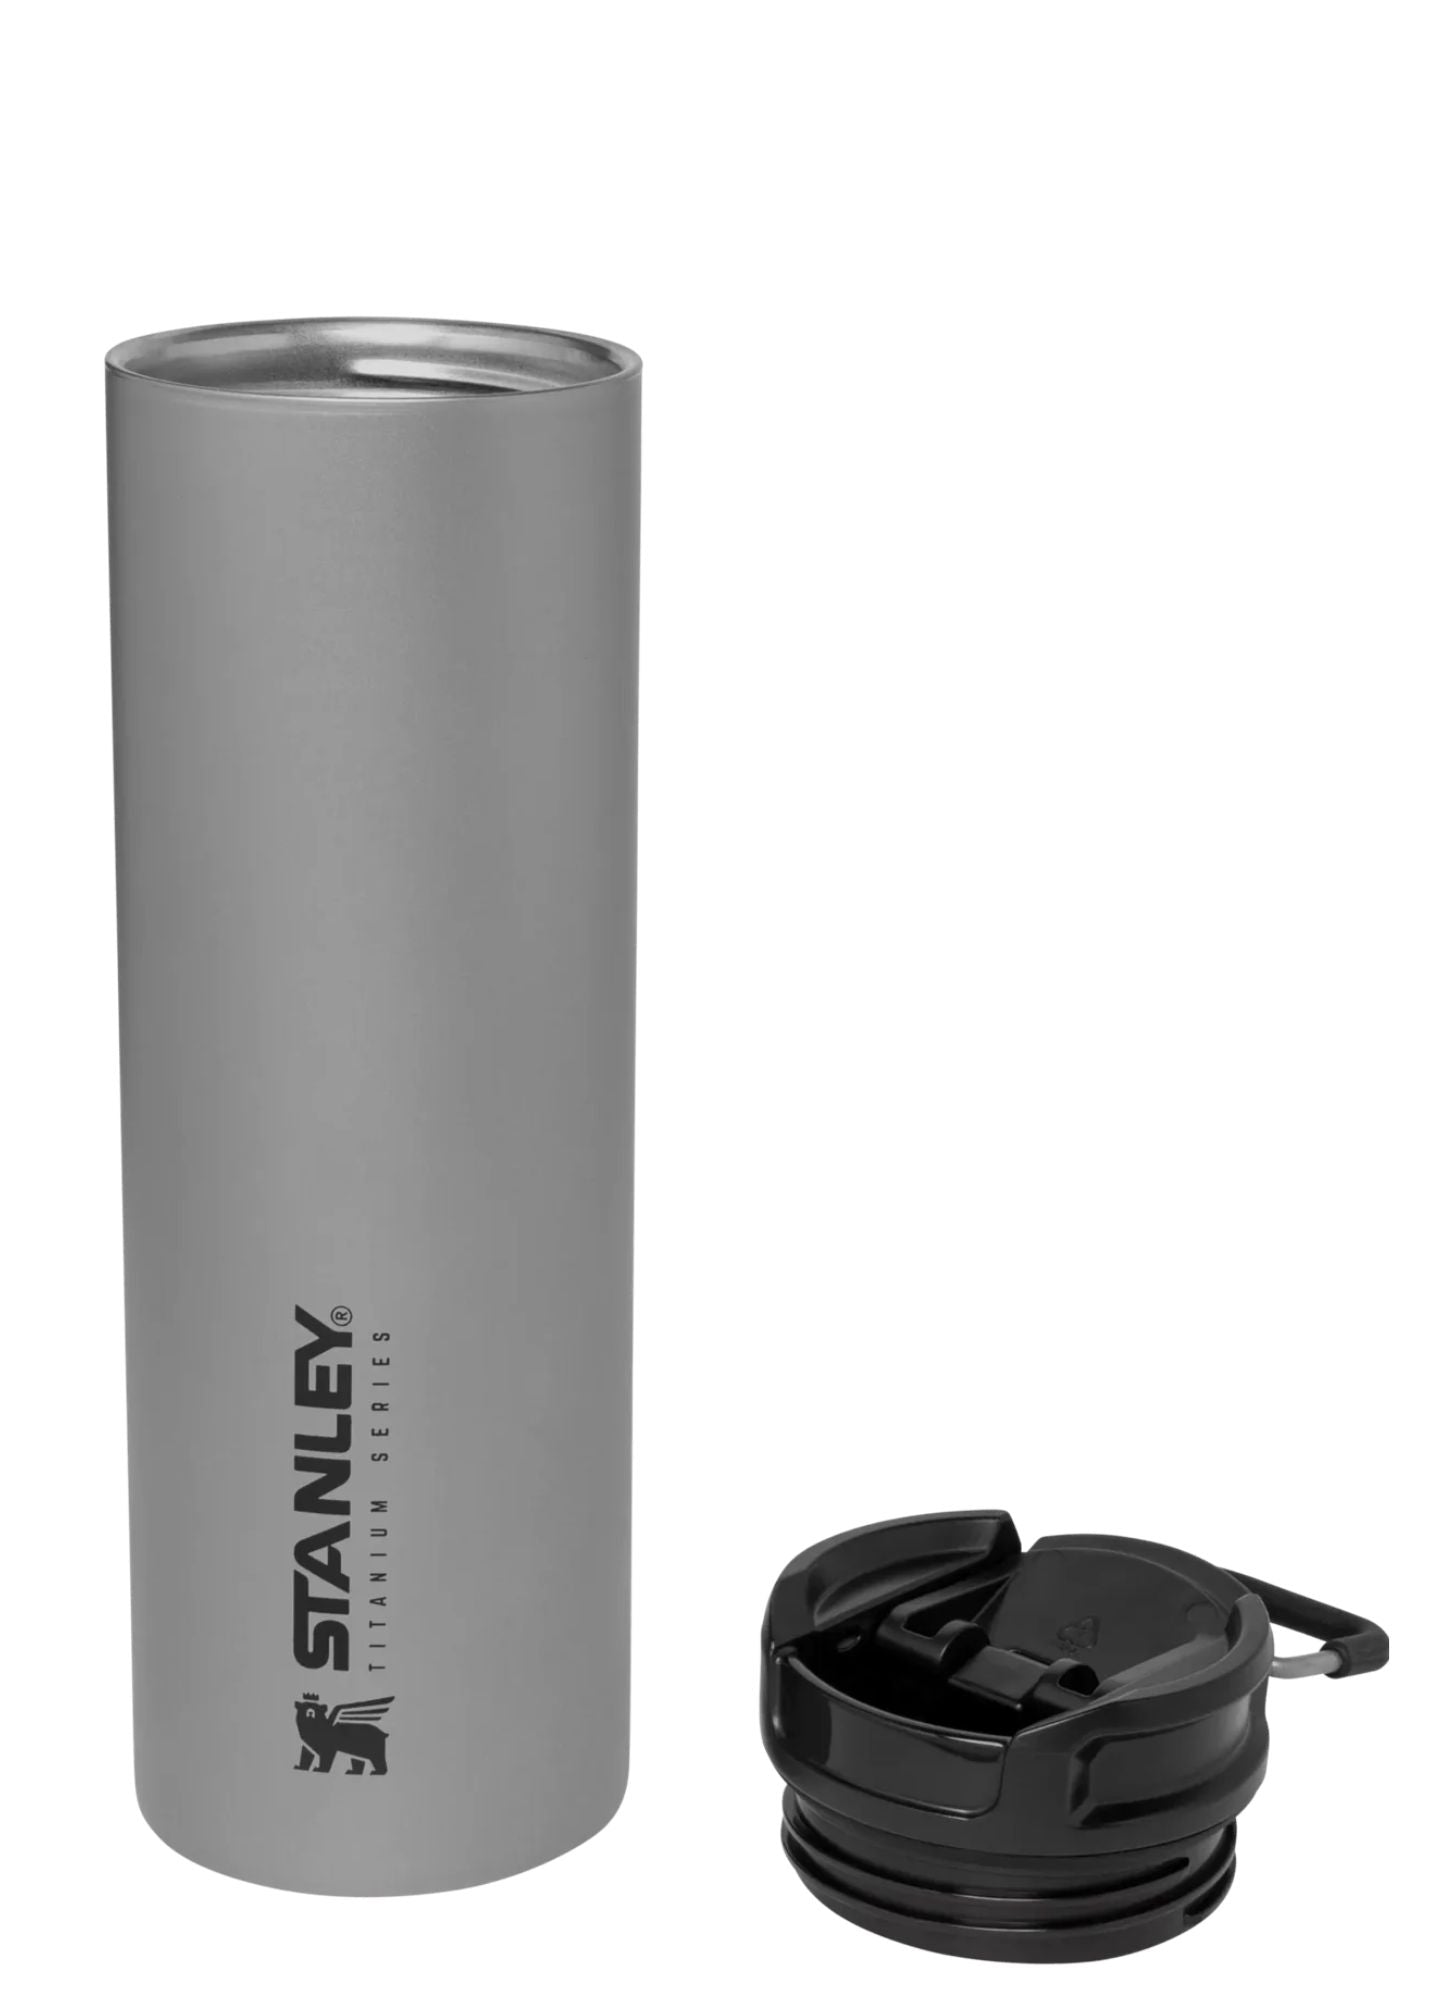 Stanley 1913 Adventure Ready Tumblers and Camp Cooking Essentials – Active  Threads